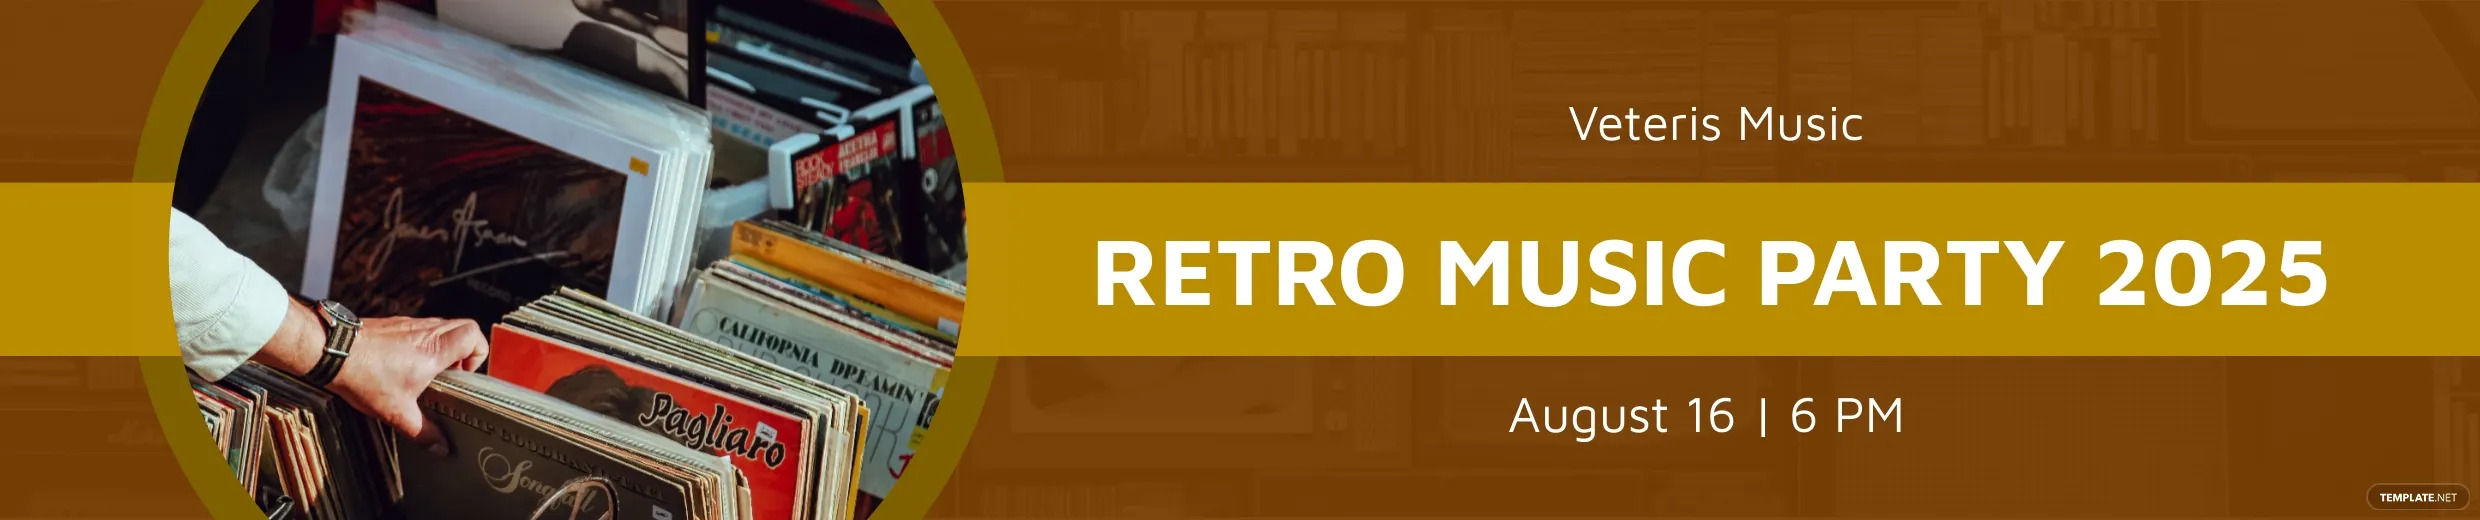 retro party music soundcloud banner ideas and examples